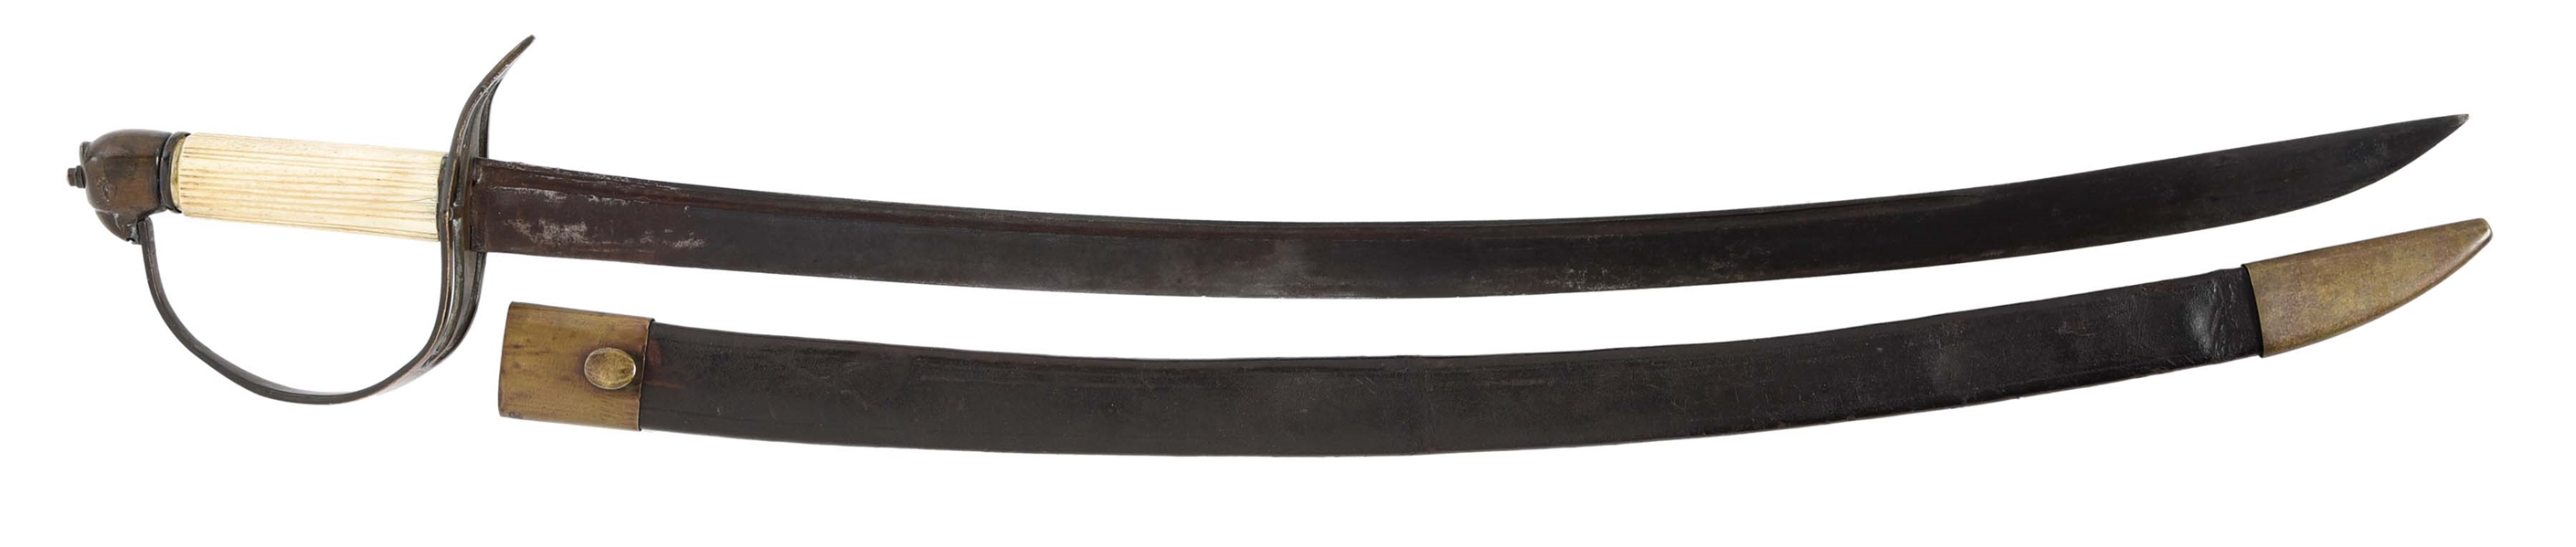 EARLY FOUR-SLOT AMERICAN EAGLE POMMEL SABER WITH SCABBARD.